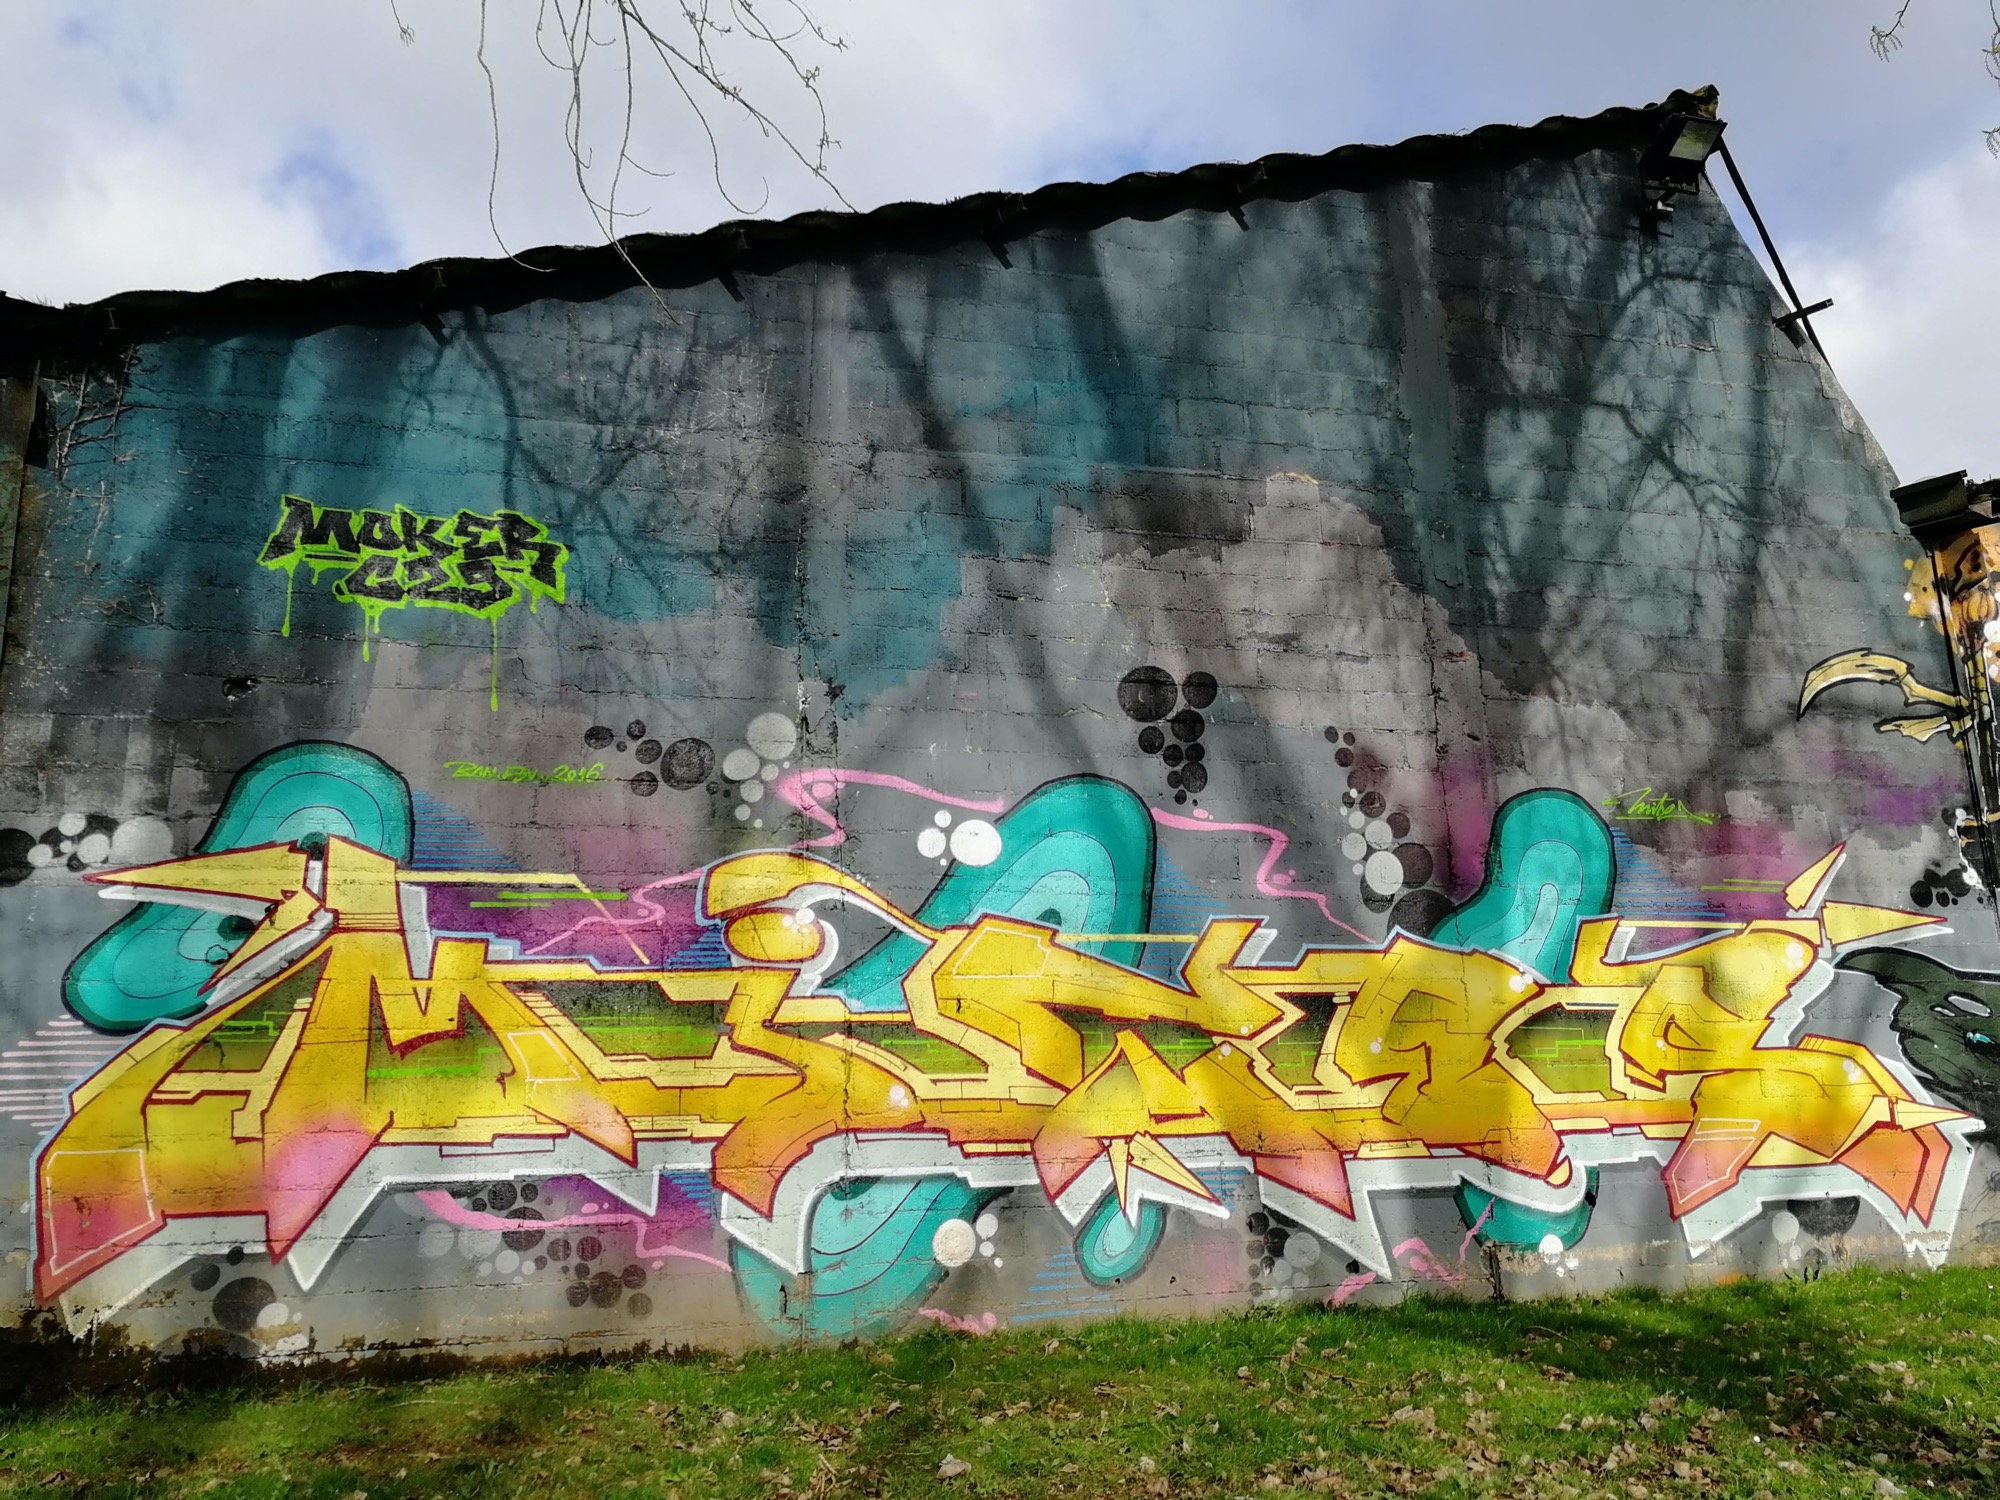 Graffiti 1211  captured by Rabot in Redon France